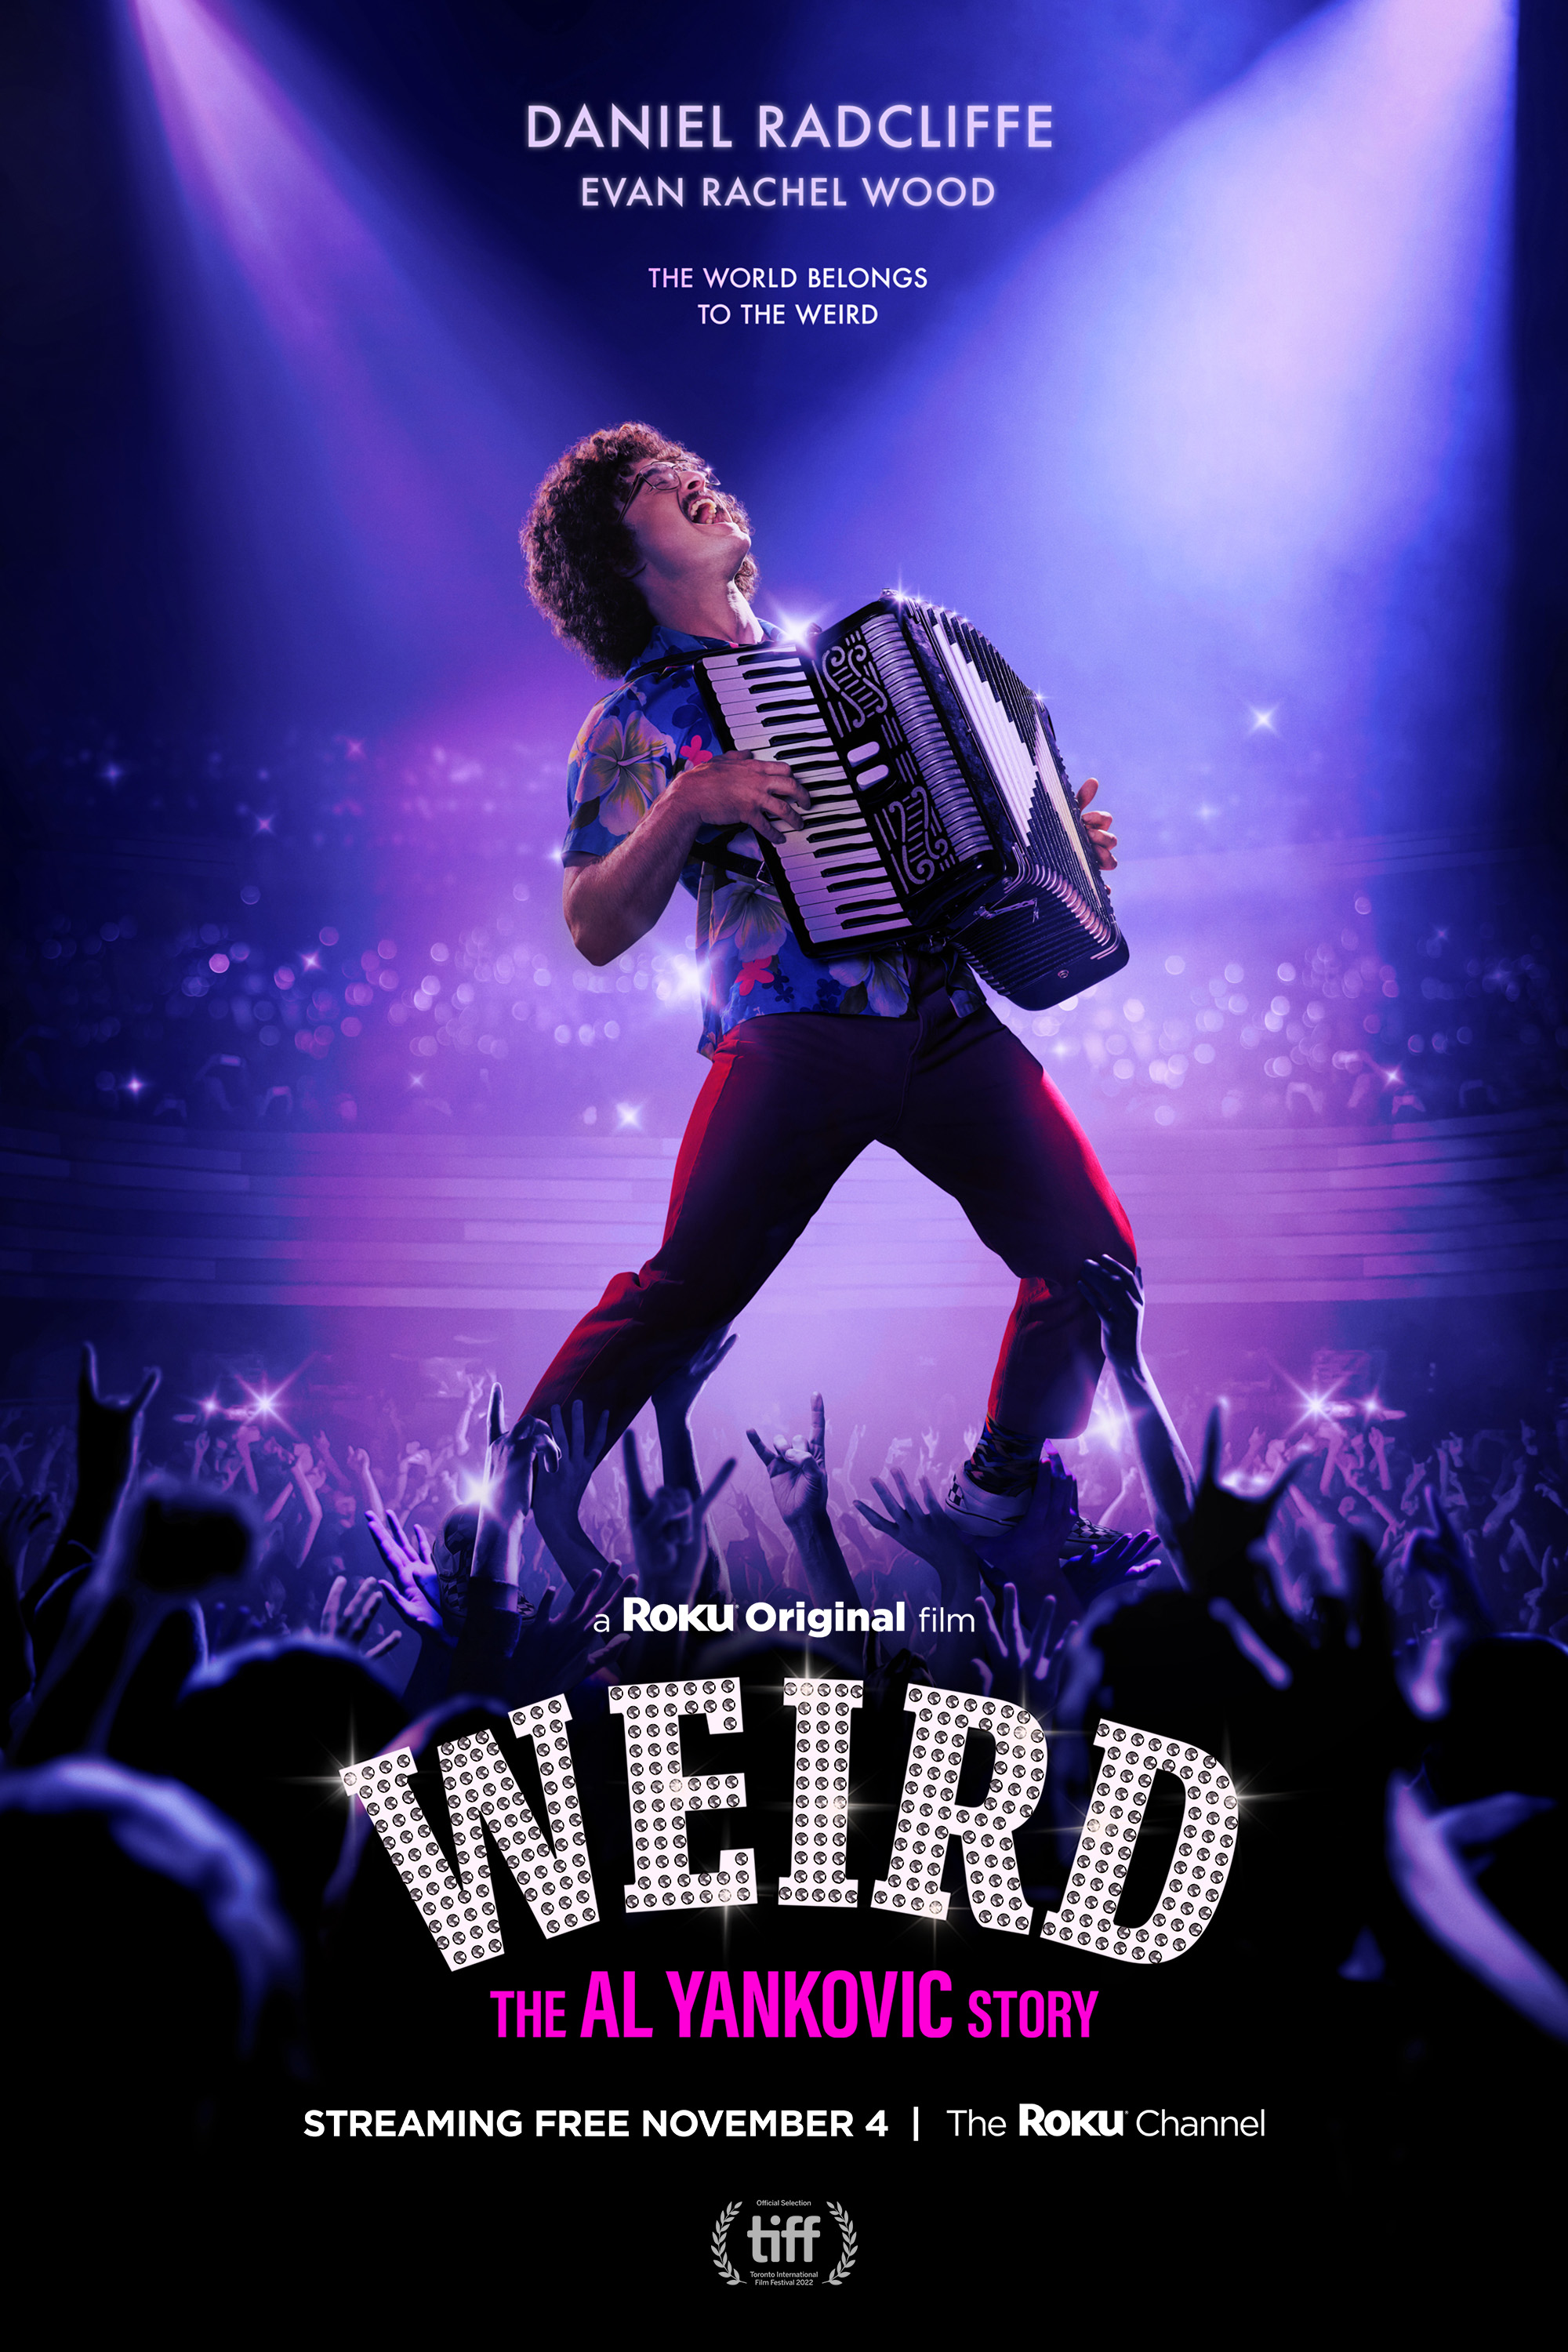 Weird: The Al Yankovic Story dvd cover